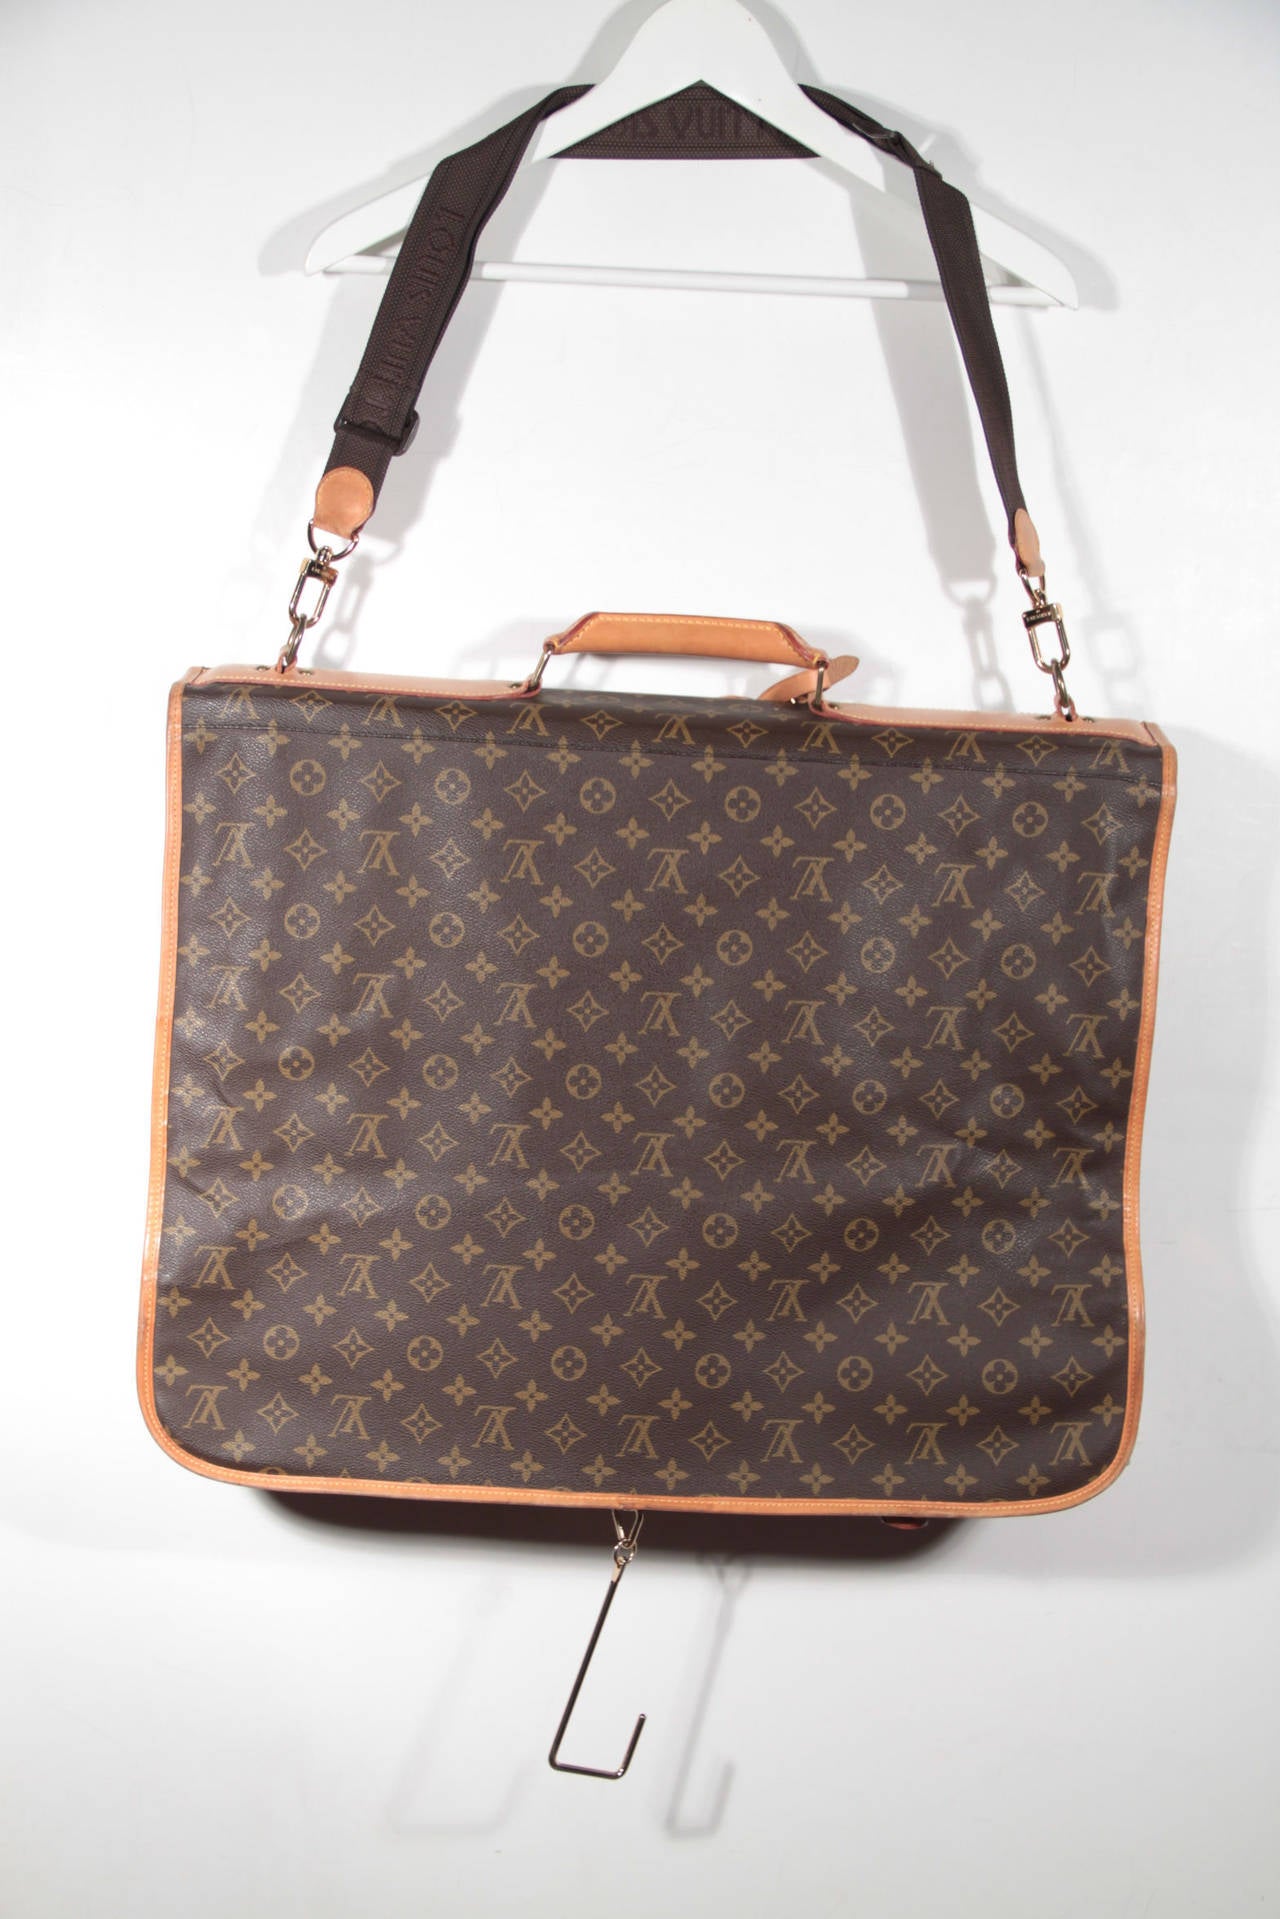 - Brown Monogram Canvas

- Foldable design with clasp on bottom sides for securing bag when folded

- Zip around closure

- Removable and adjustable shoulder strap and leather top carrying handle

- Removable leather address holder

-